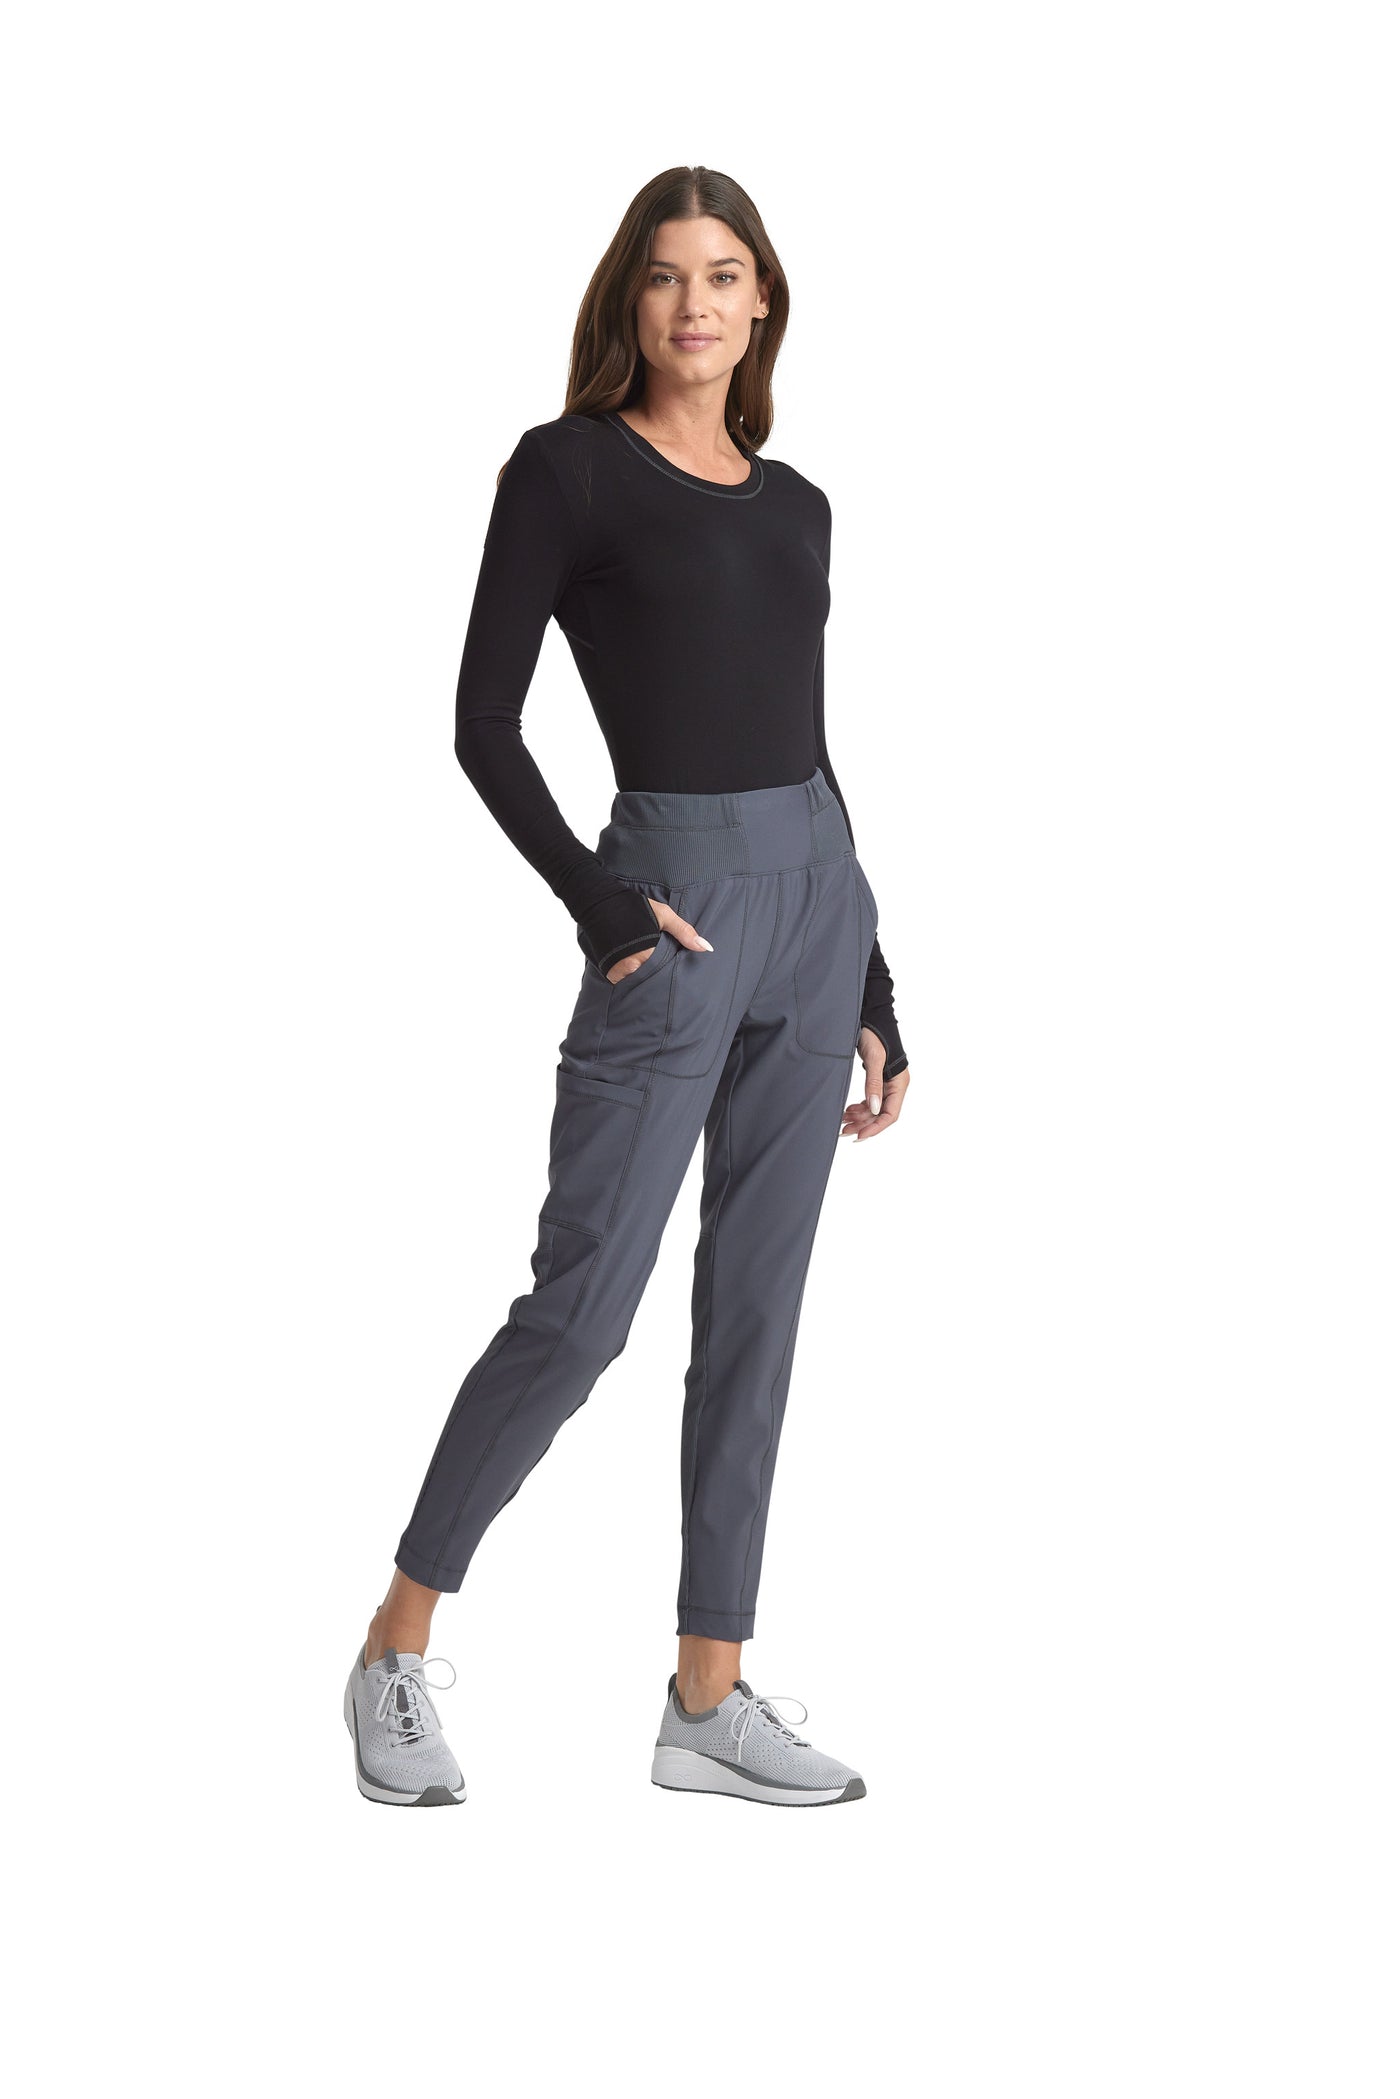 Pewter - Cherokee Infinity High Rise Pant